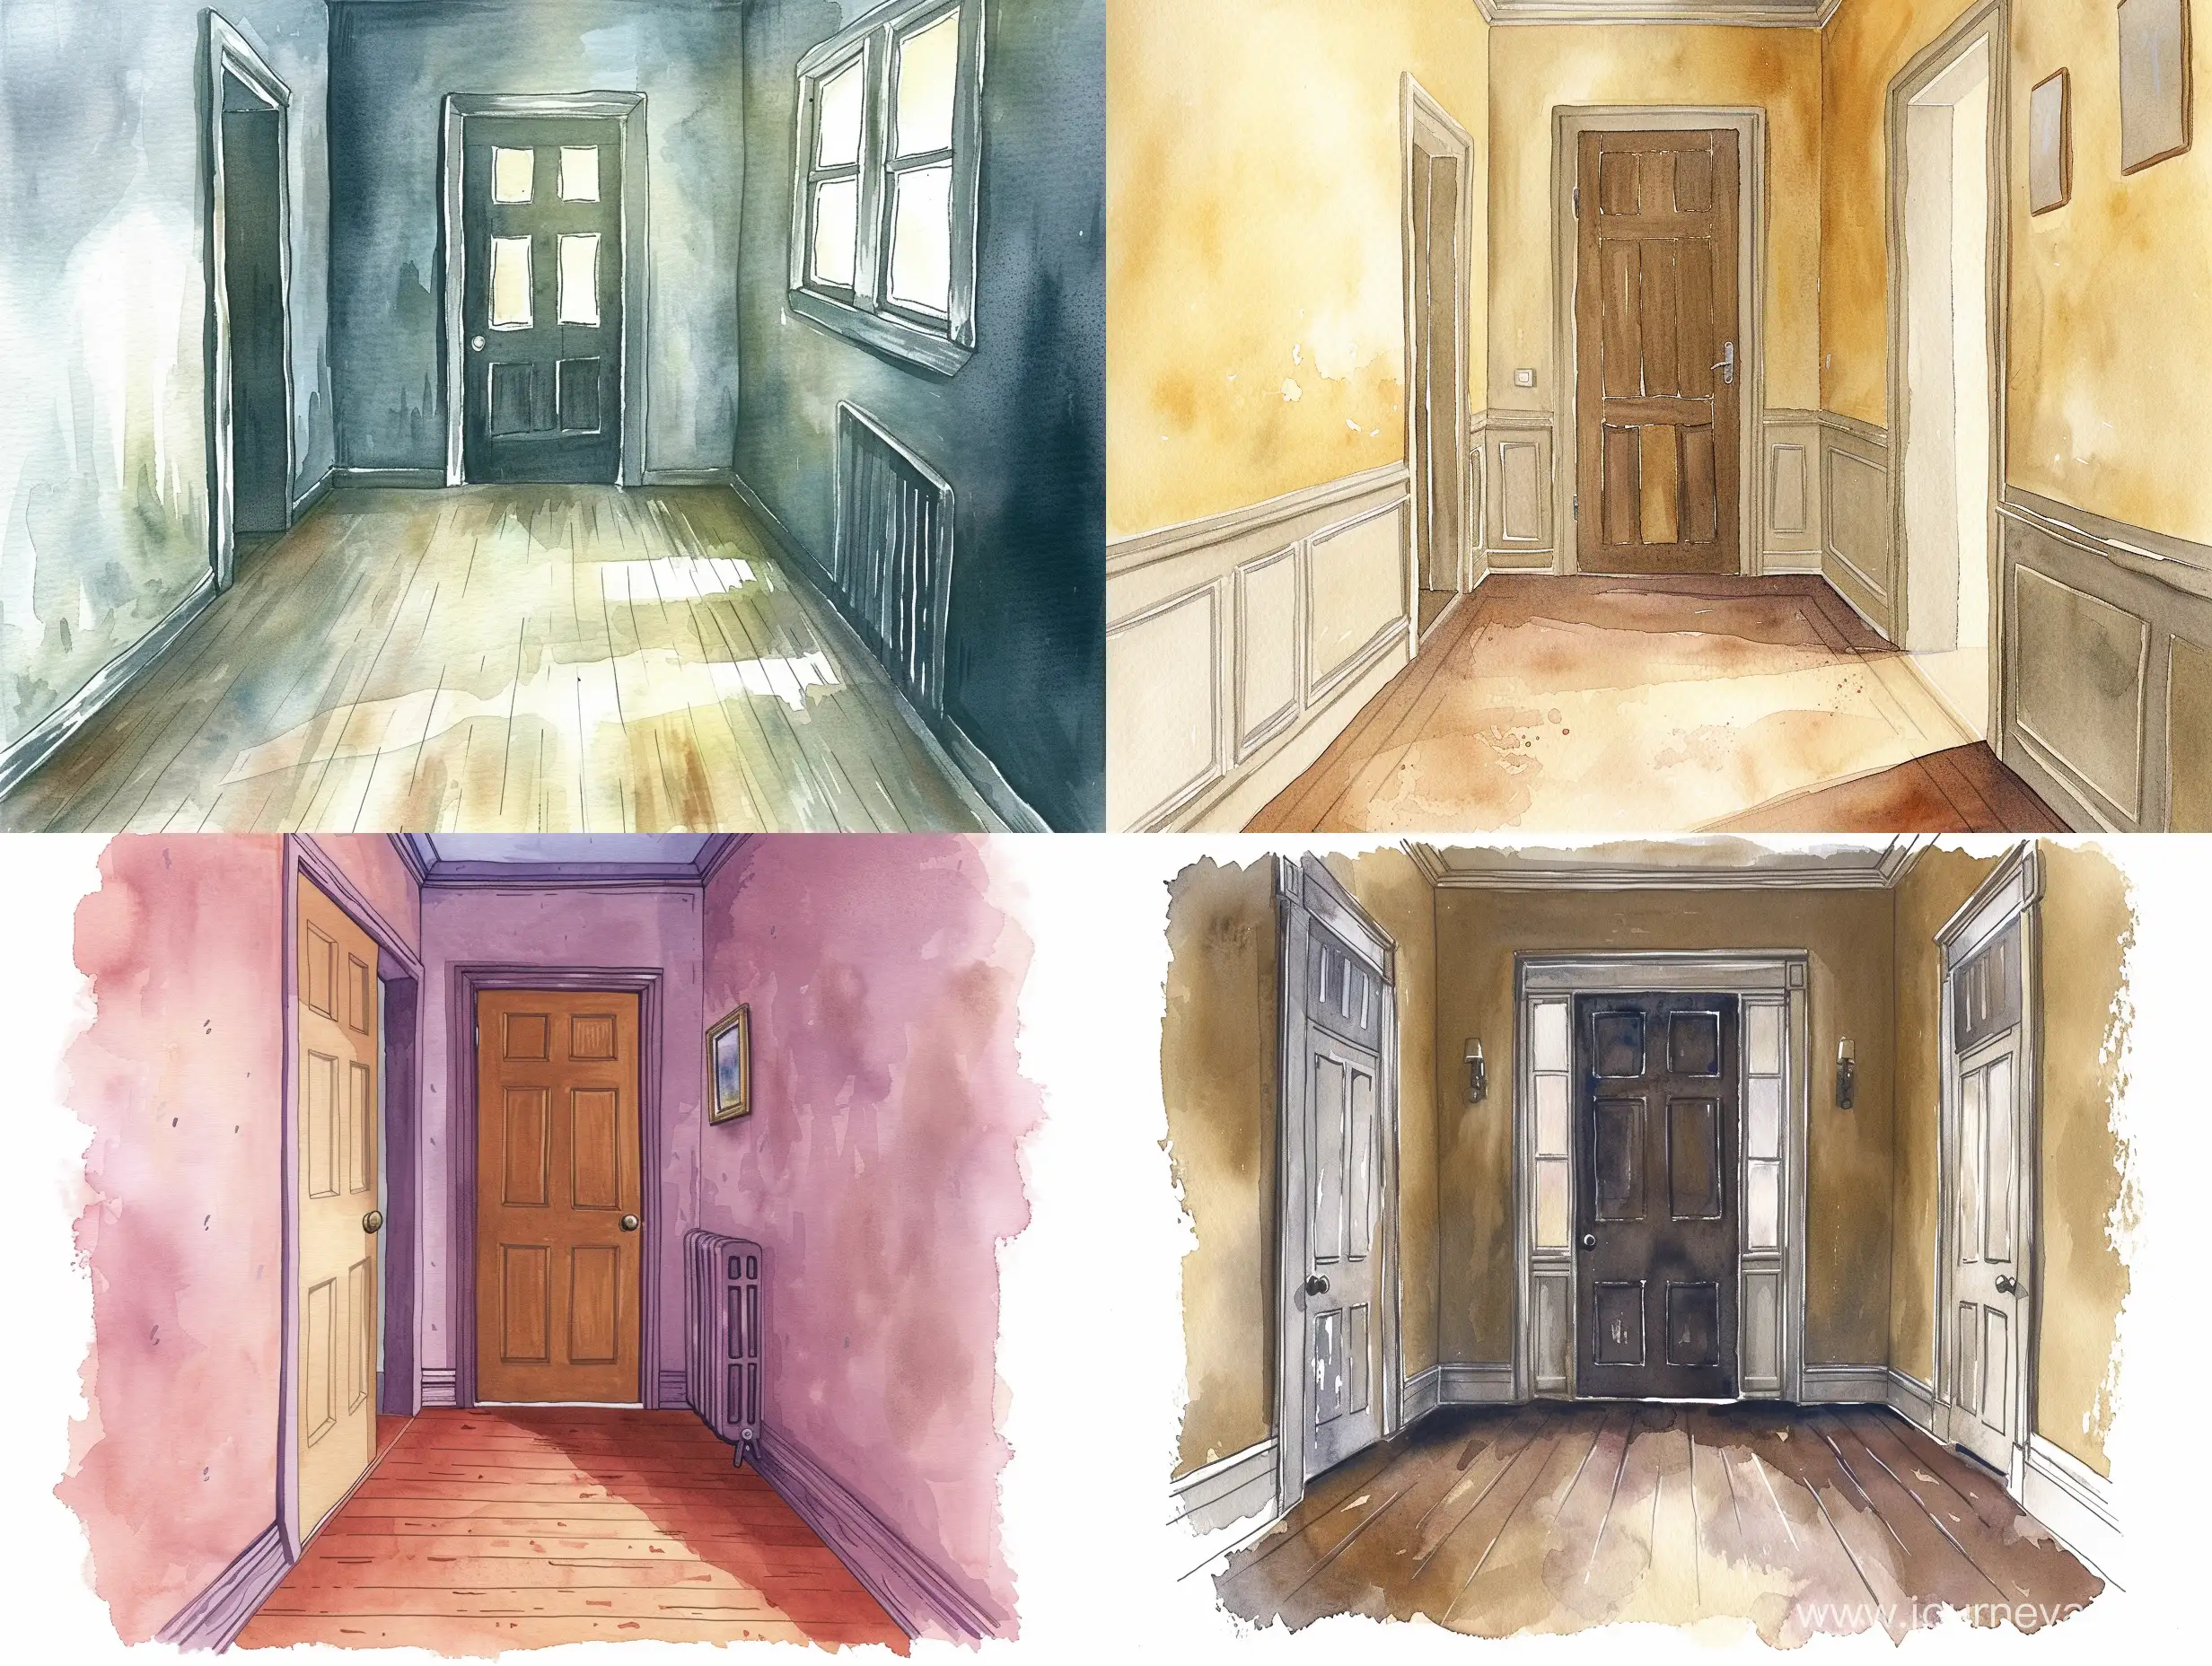 Watercolor illustration of the corridor inside the house, which rests against the closed front door